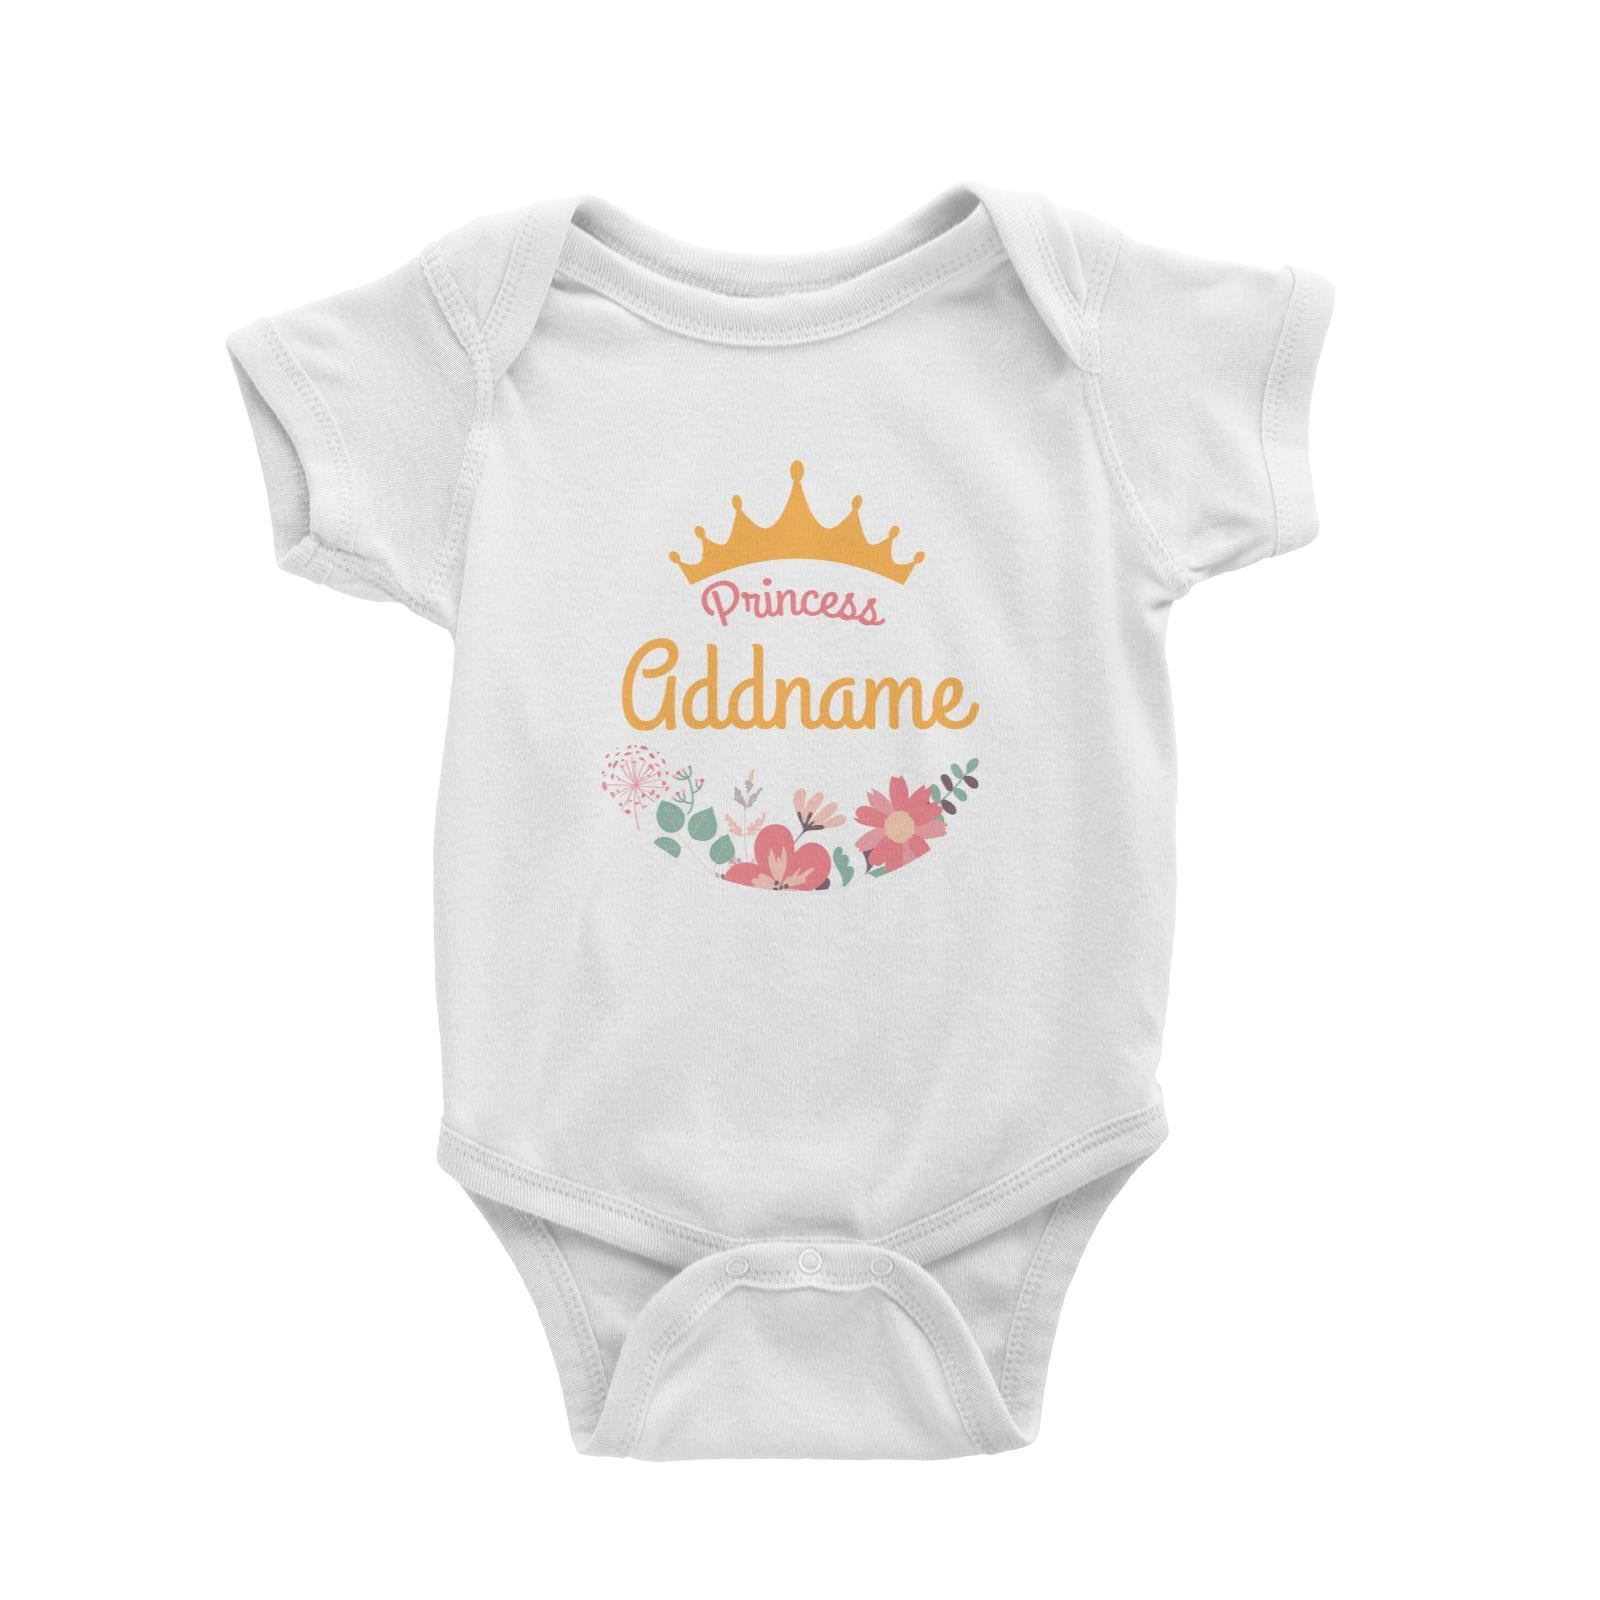 Princess Addname with Tiara and Flowers 2 Baby Romper